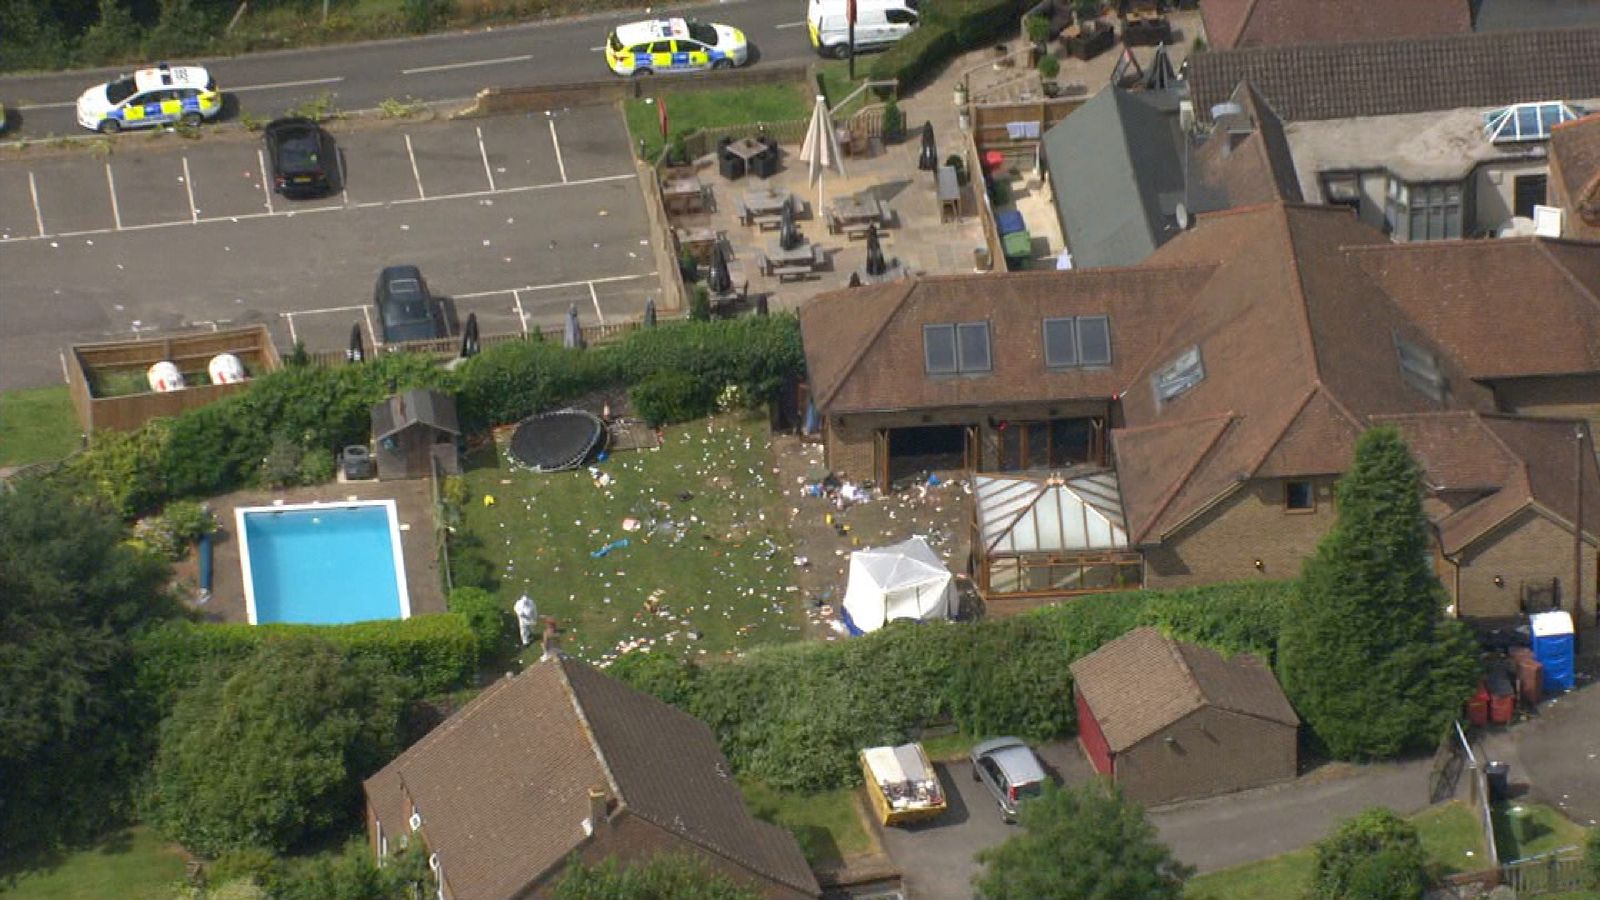 Surrey Pool Party Killing Suspects Arrested Uk News Sky News